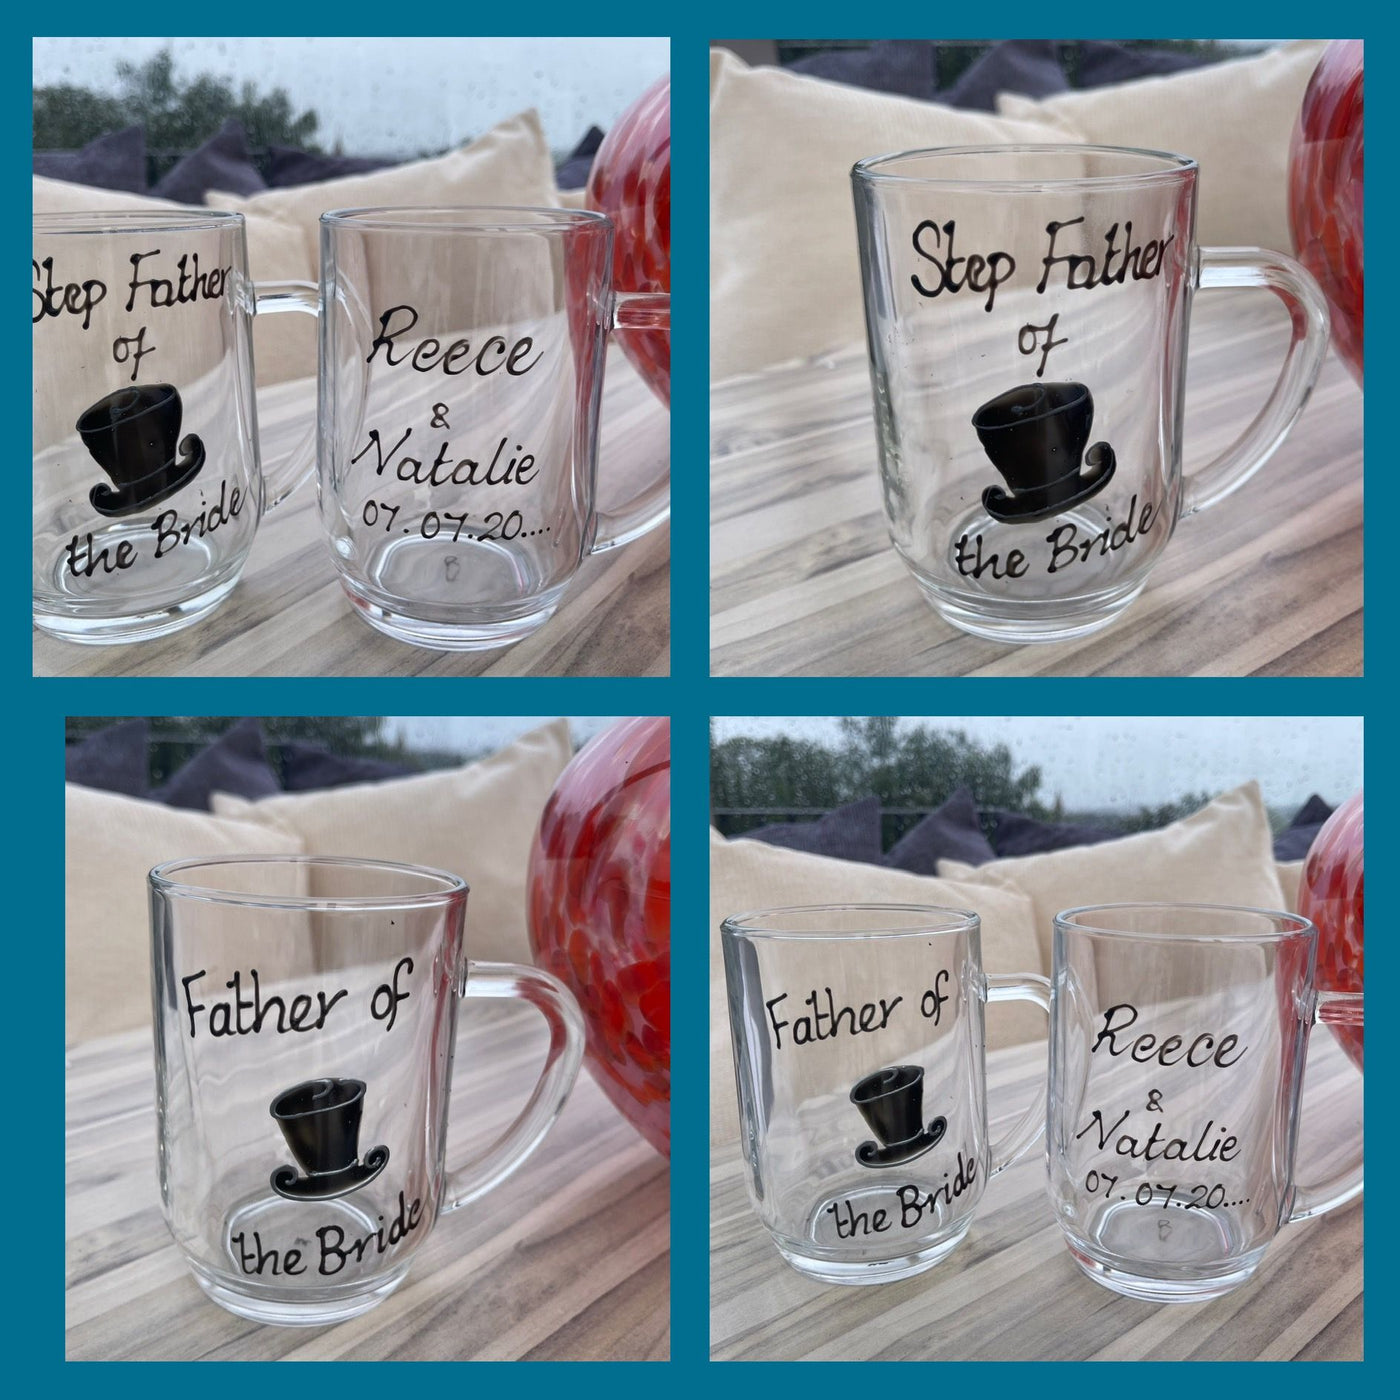 Wedding Day Gifts for Father & Step Father Of The Bride